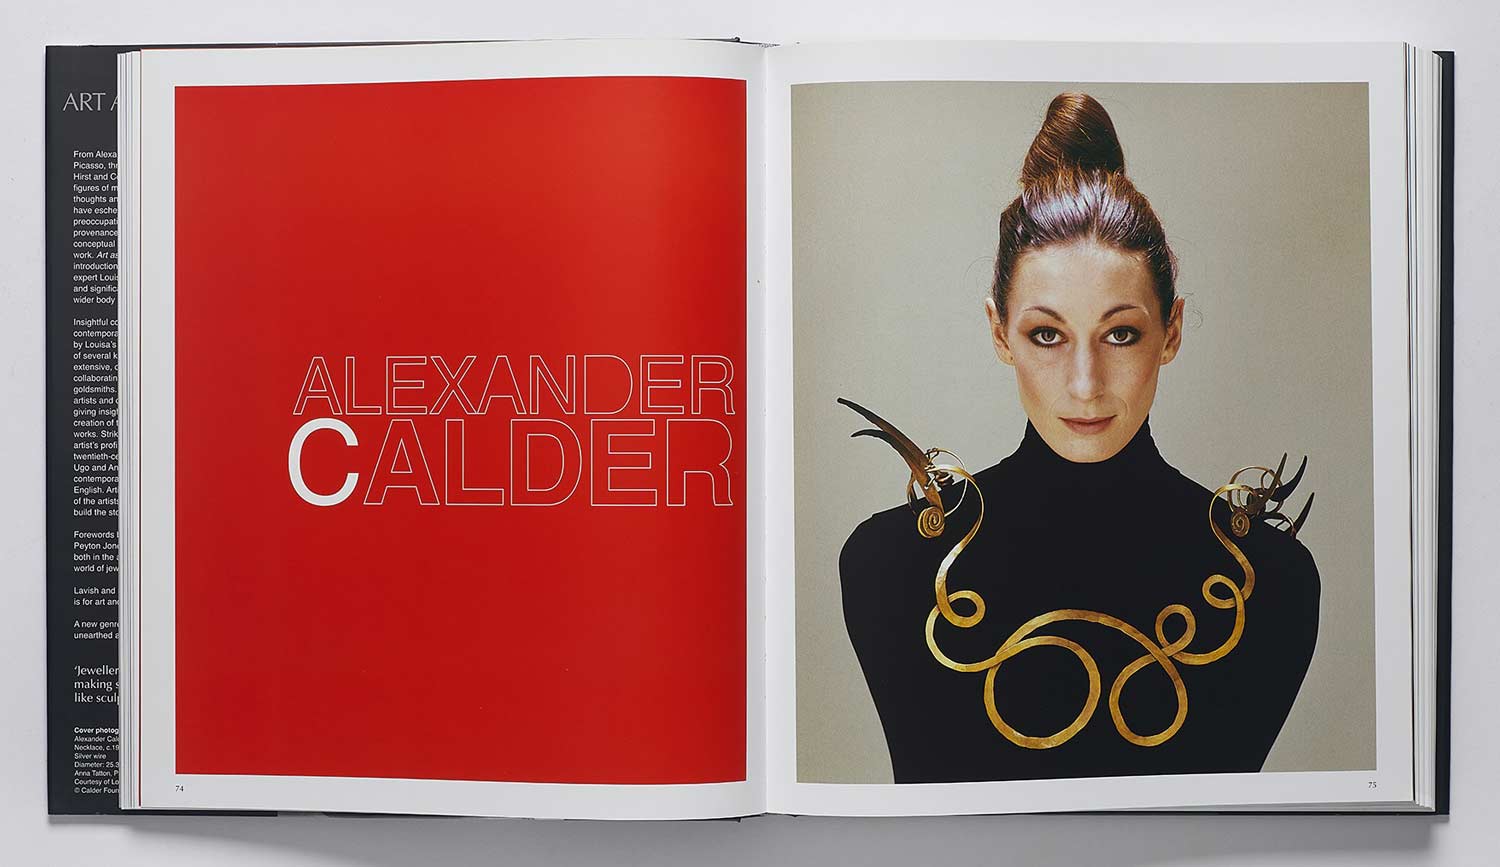 Book spread featuring the chapter title "Alexander Calder" and an image of Anjelica Huston wearing a black turtleneck and an elaborate sculptural gold necklace